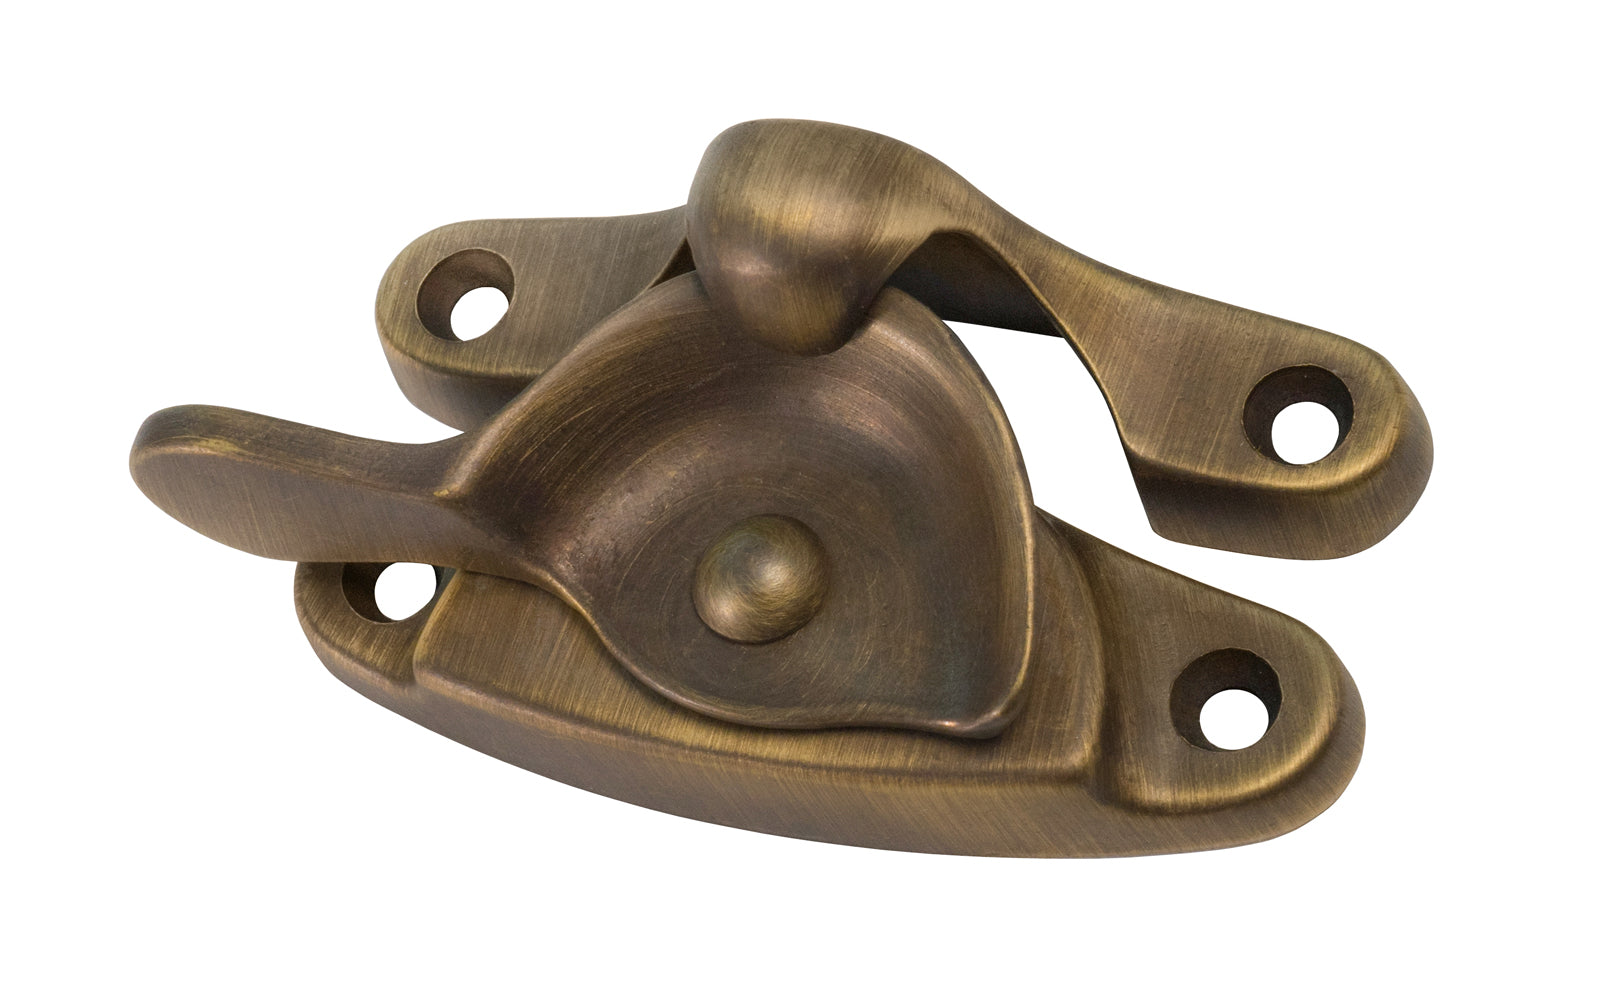 High quality & very popular classic solid brass crescent-style sash lock designed for hung or sash windows. Solid brass material with a durable pivot turn. 2-7/8" x 1" Large Size Lock. Antique Brass Finish.